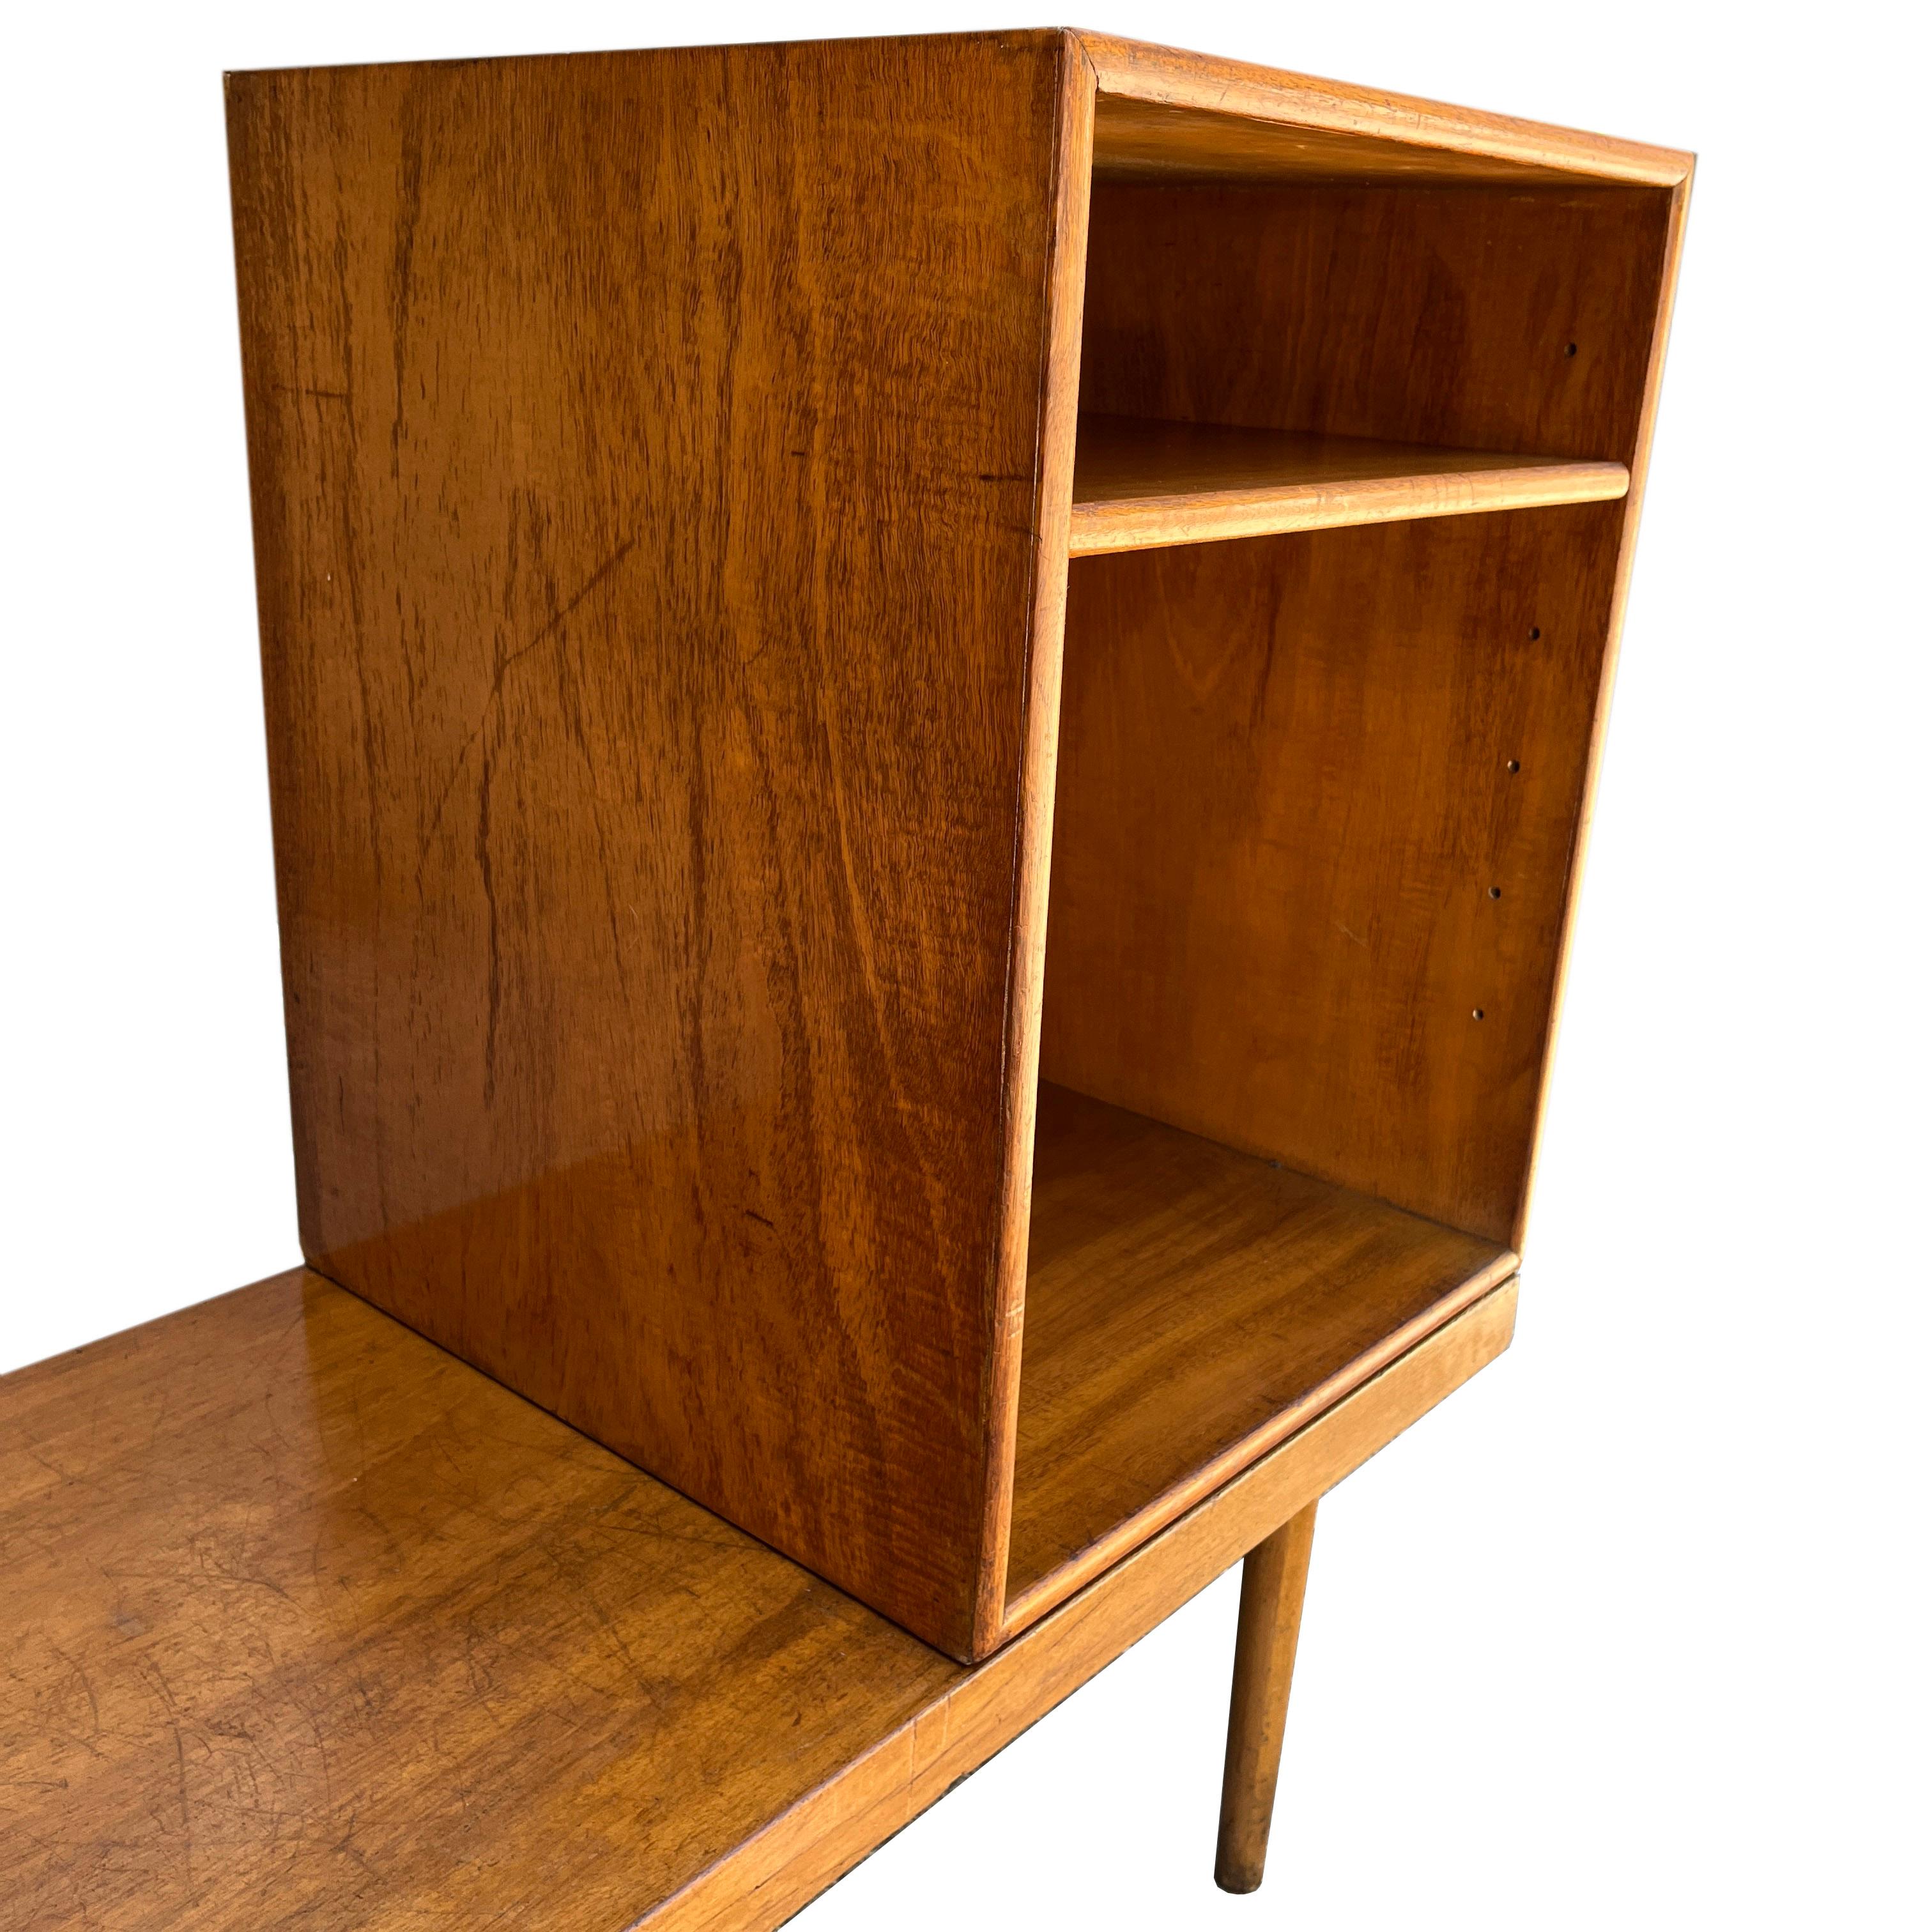 Mahogany Rare and Important Midcentury Bench/Cabinets- Eames and Saarinen -Organic Design For Sale